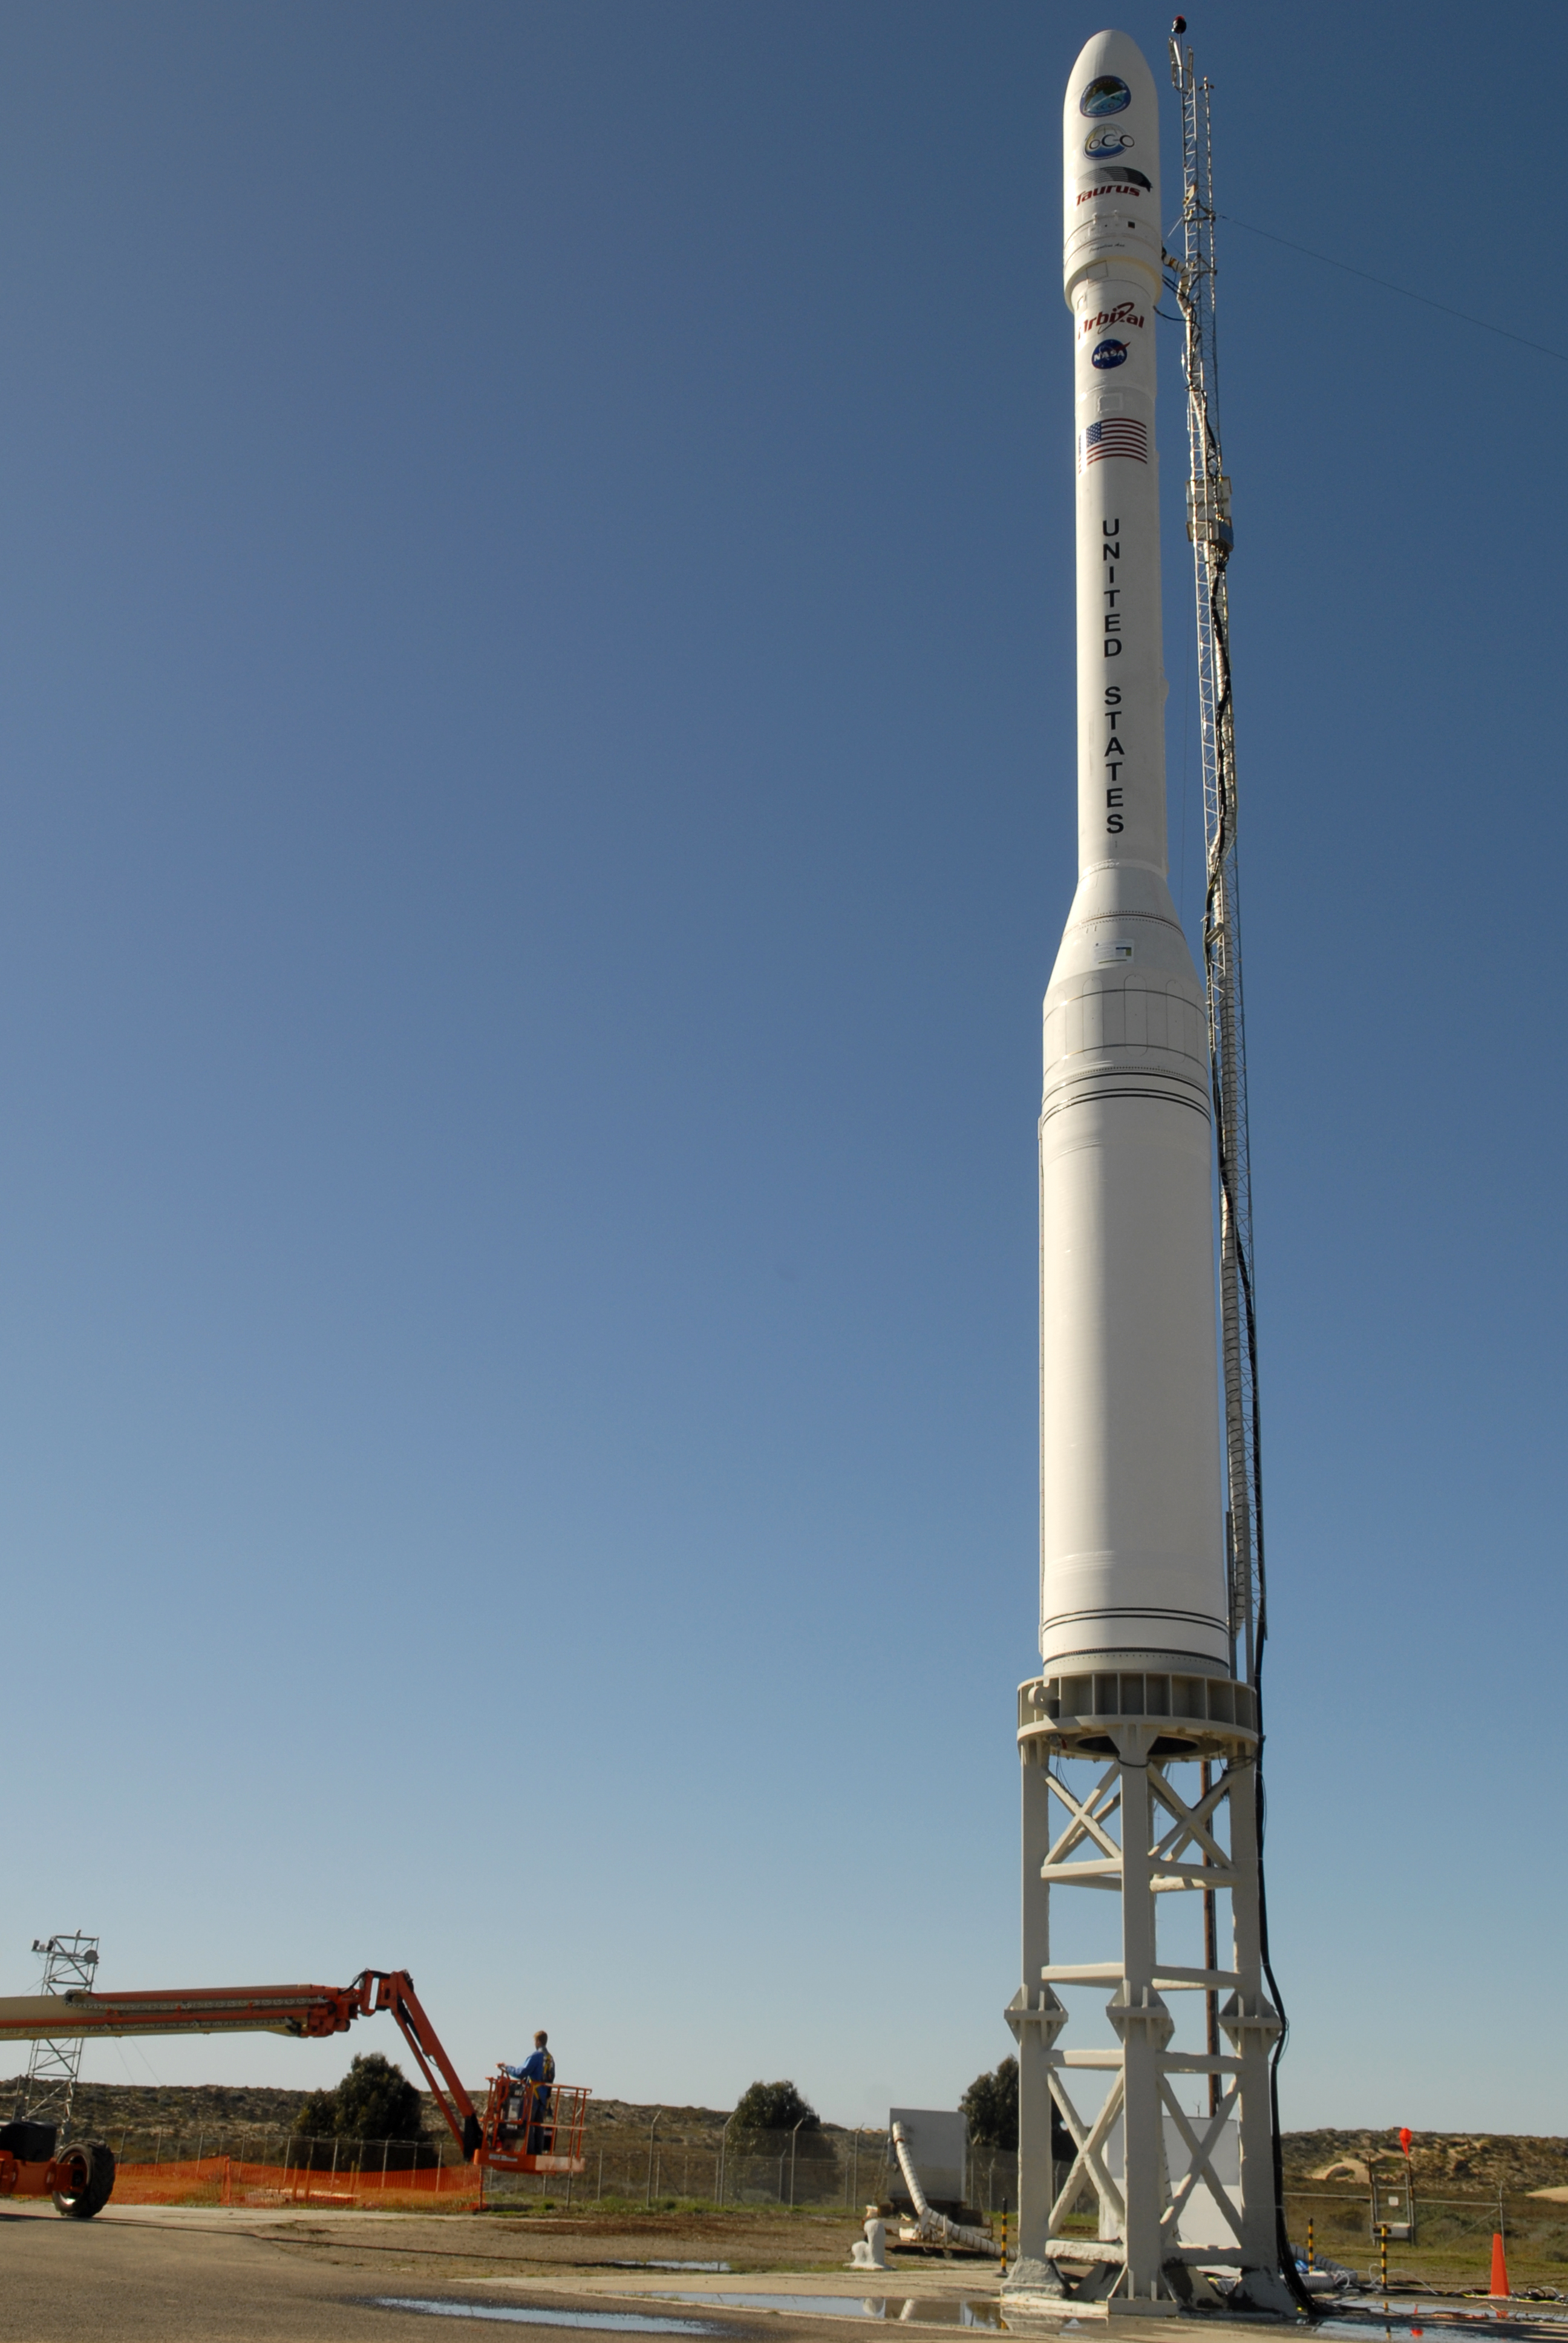 Taurus-3110 with Orbiting Carbon Observatory awaiting launch